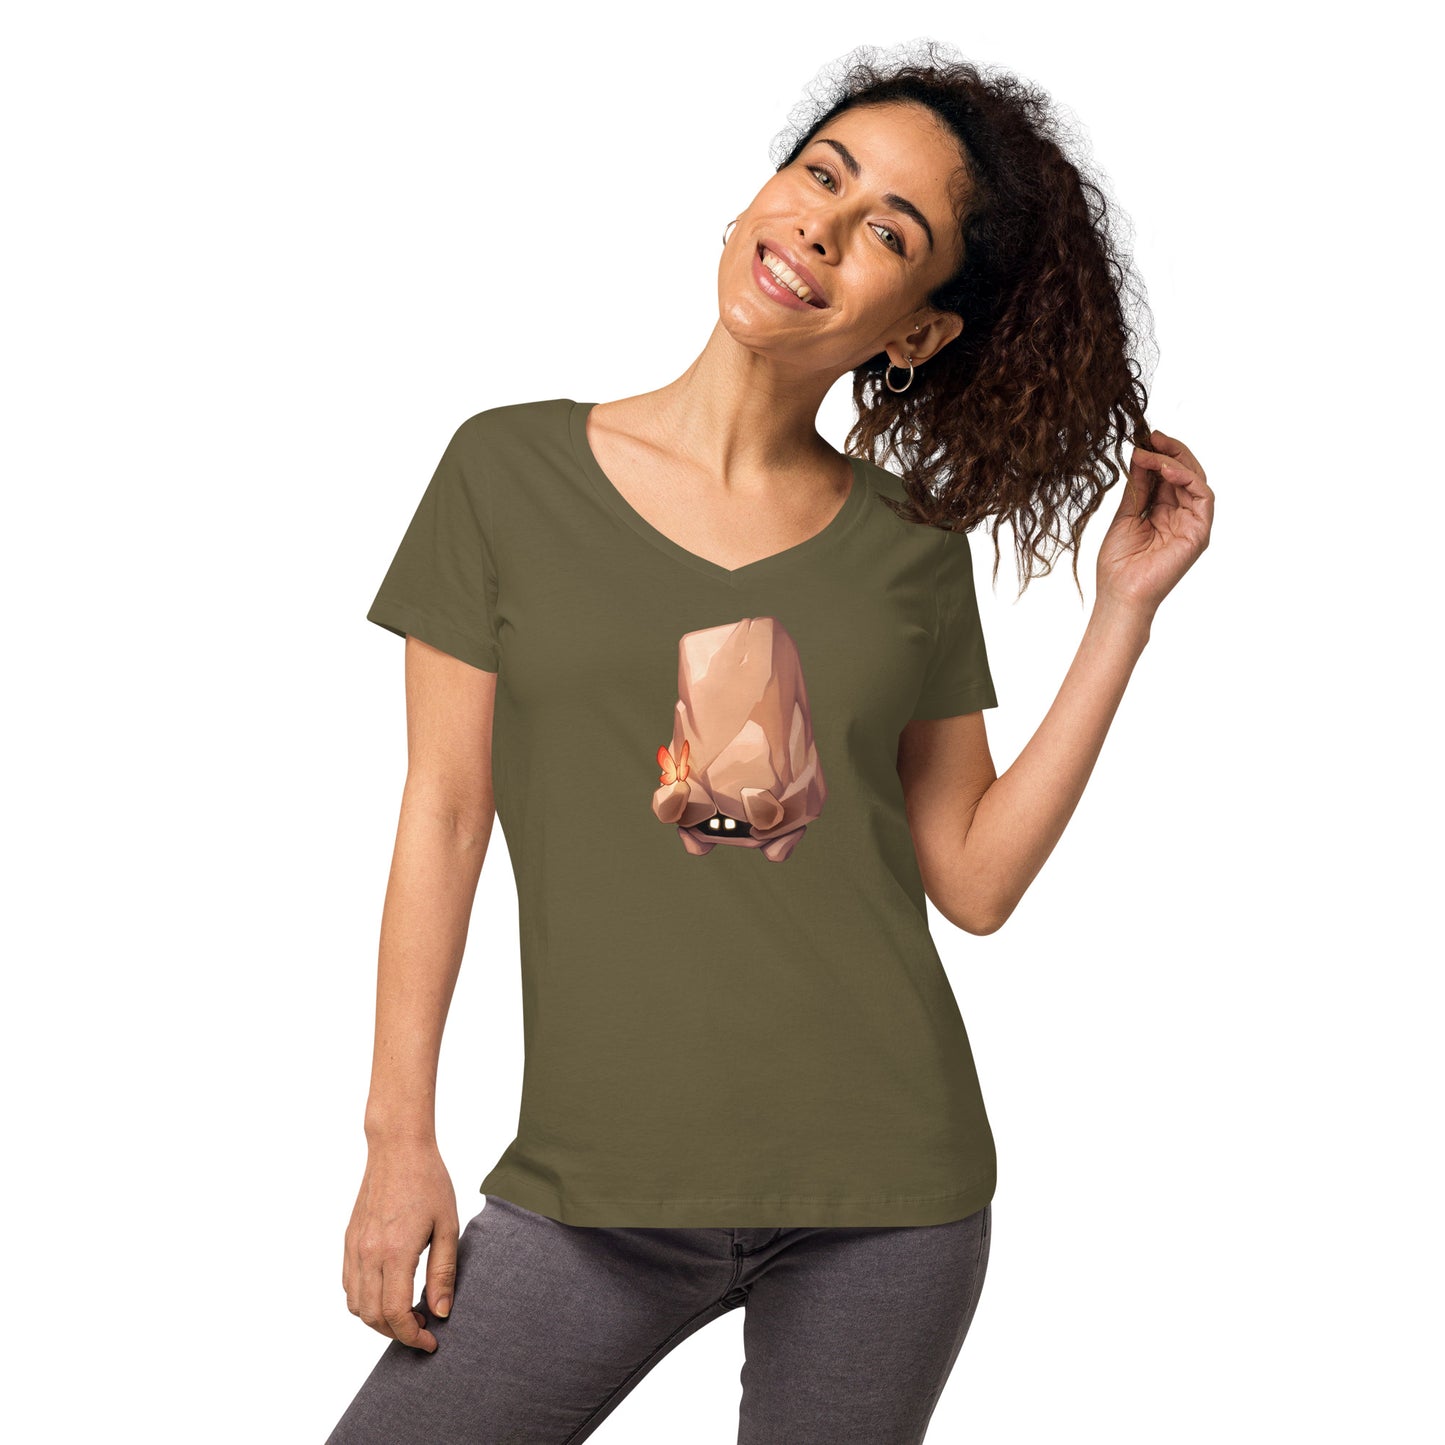 Women’s fitted v-neck t-shirt: Terry